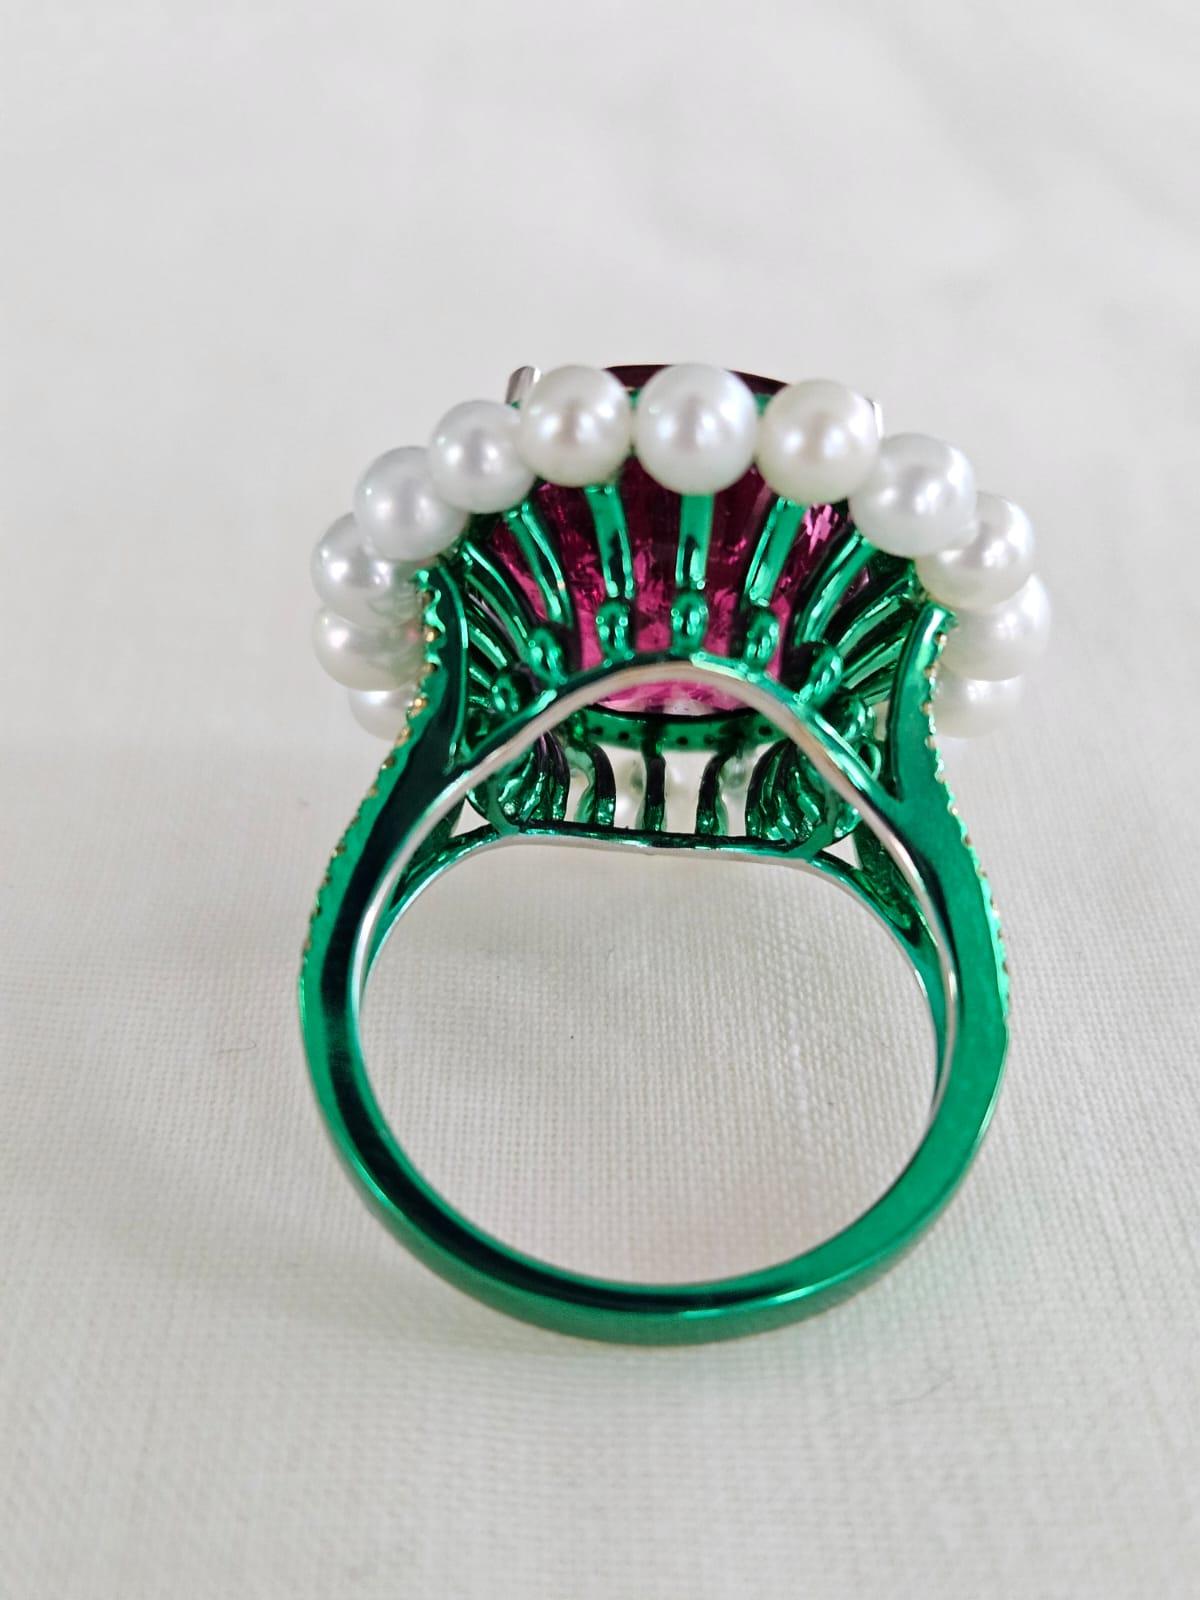 A very gorgeous and one of a kind, Tourmaline & Pearl Engagement Cocktail Ring set in 18K Gold & Diamonds. The weight of the Tourmaline is 13.61 carats. The weight of the Pearl is 7.12 carats. The Diamonds weight is 0.39 carats. Net 18K Gold weight